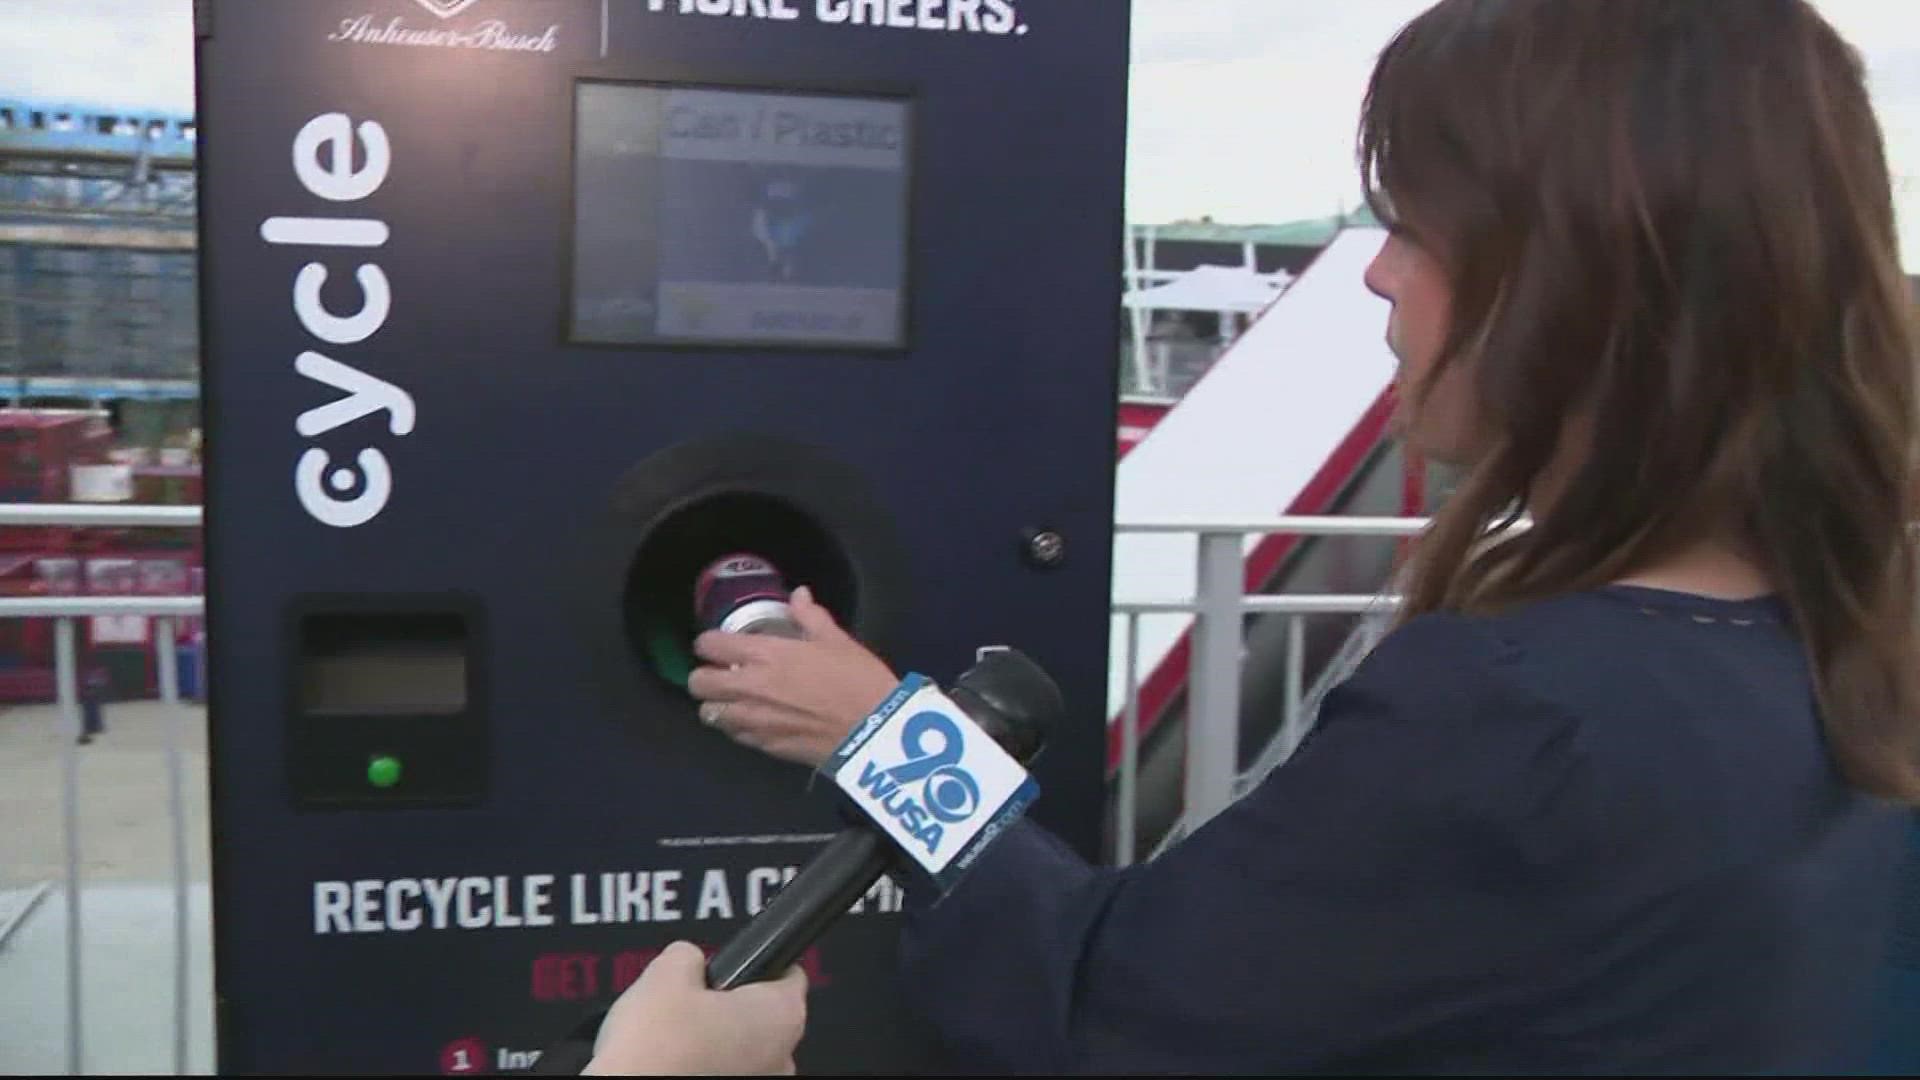 The Washington Nationals unveil they're "reverse vending machines"